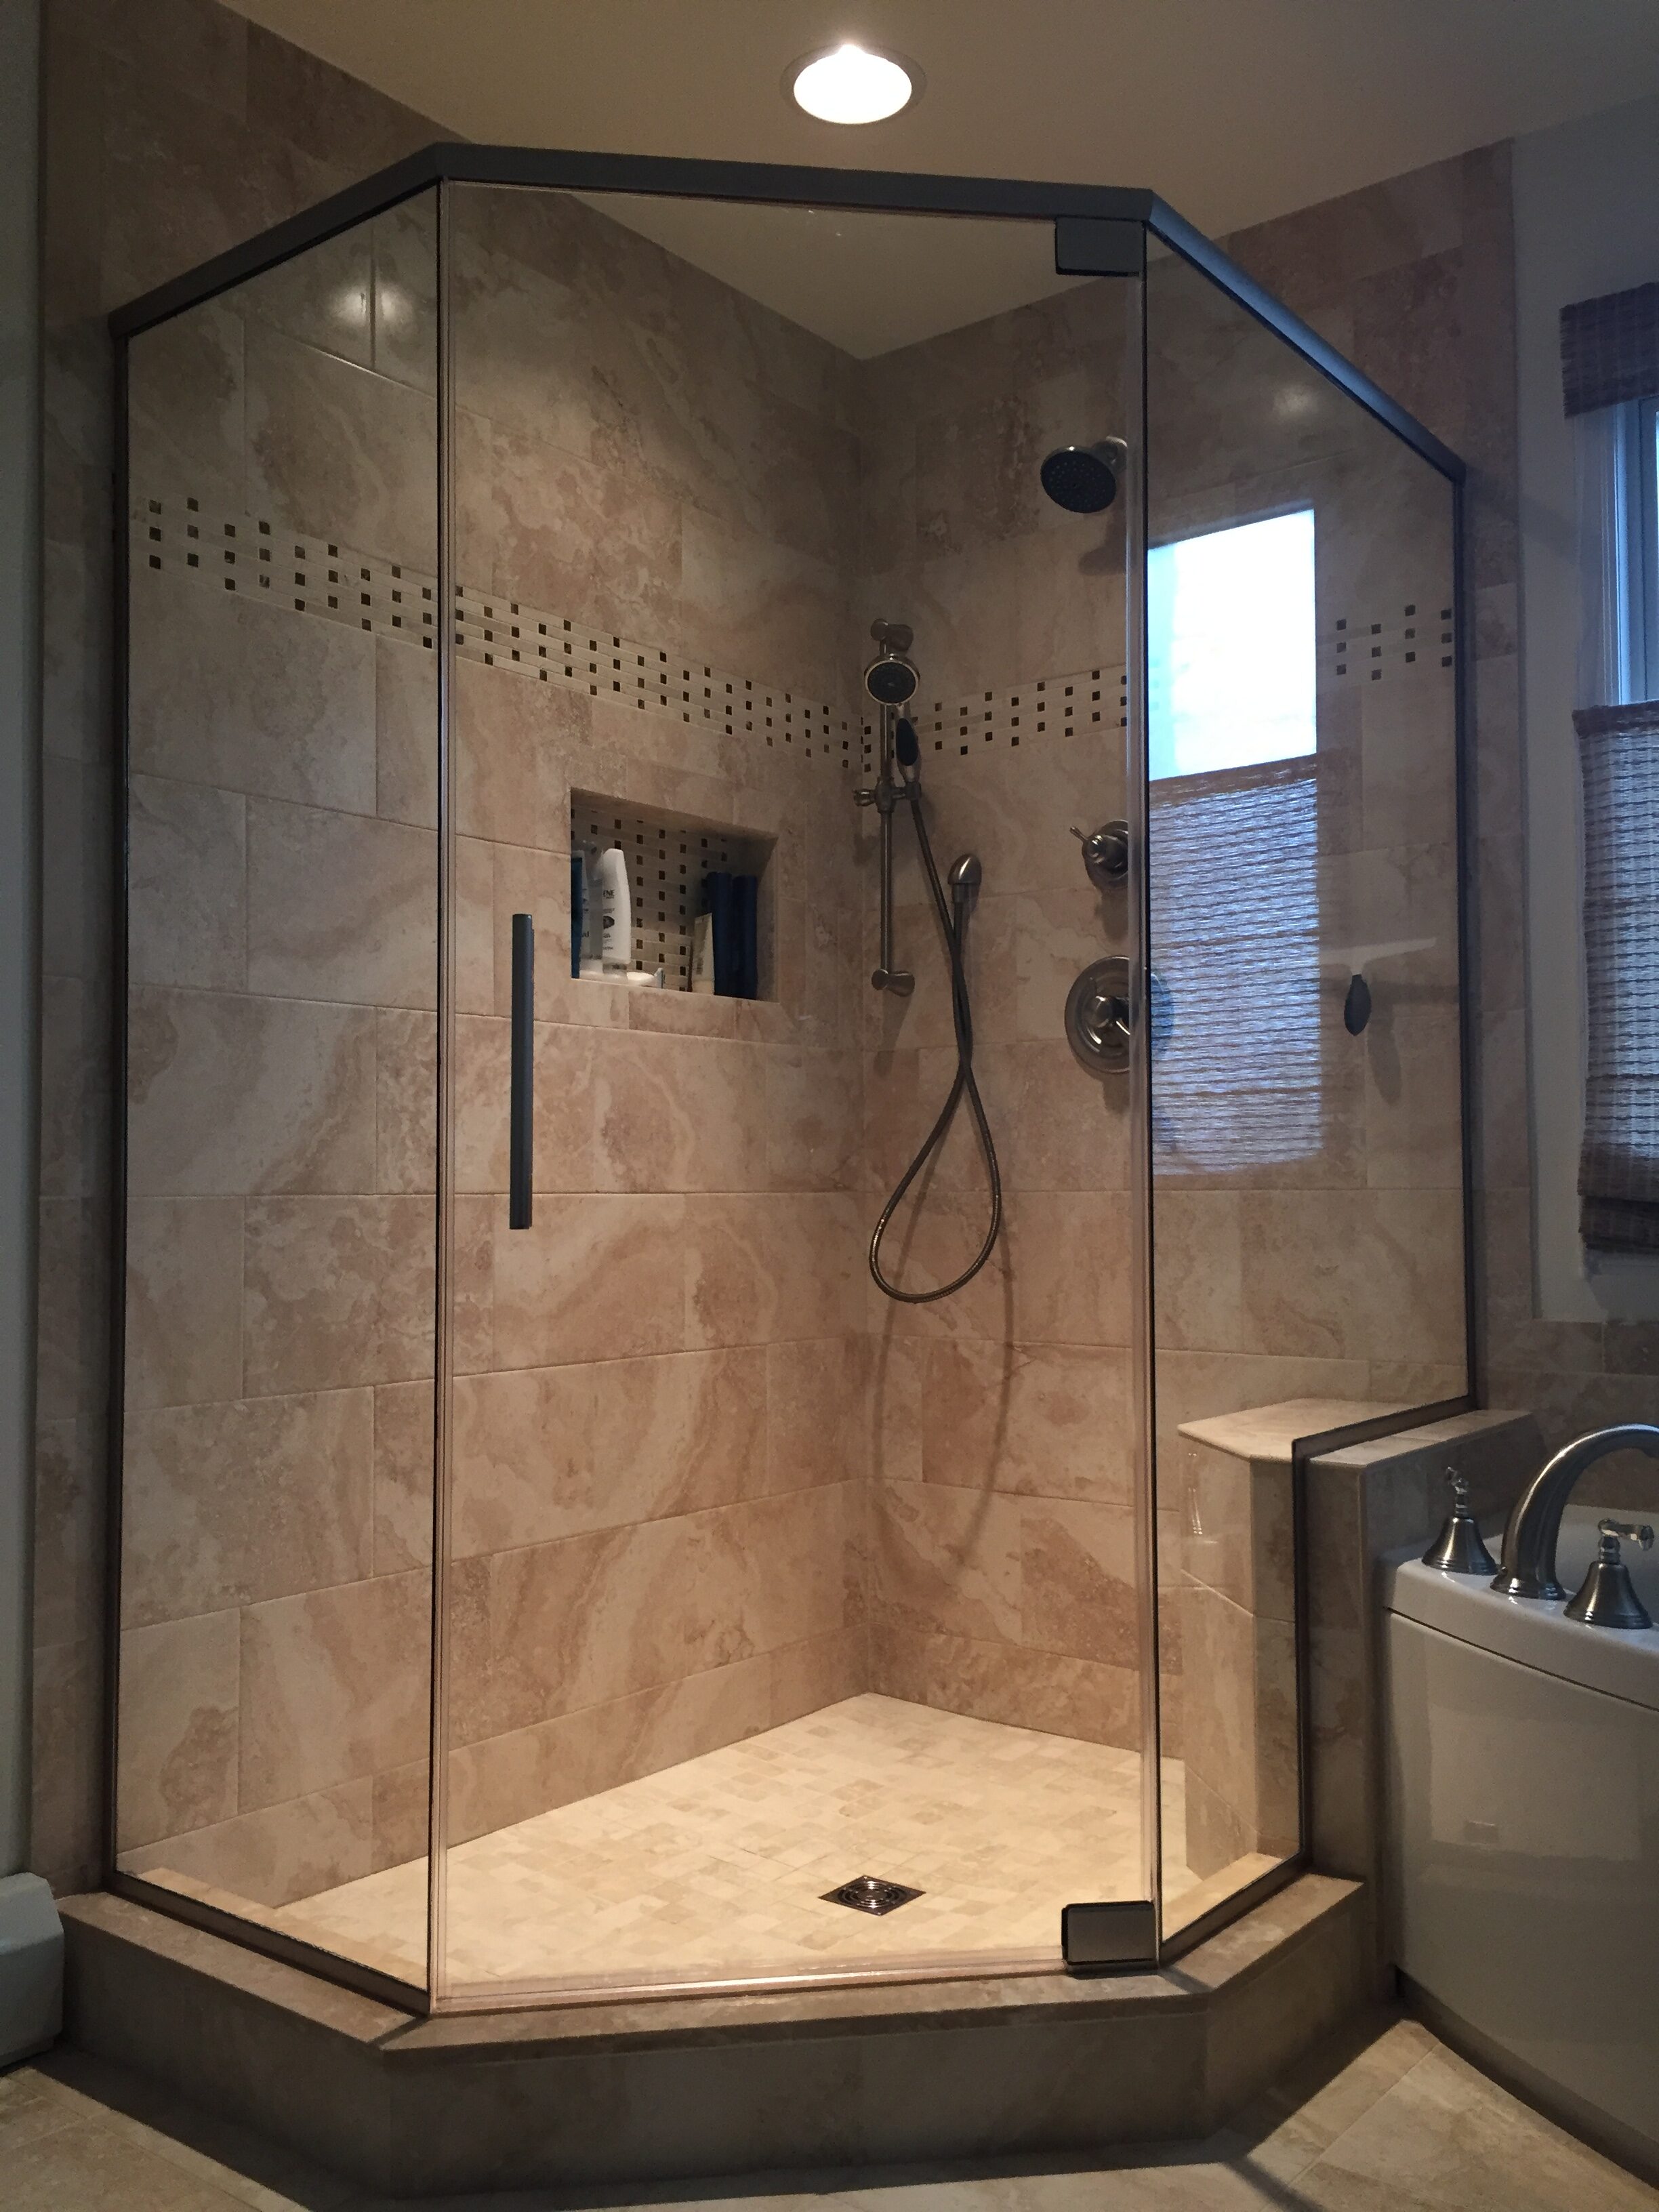 Products by Merrell Building, Glass Shower Doors